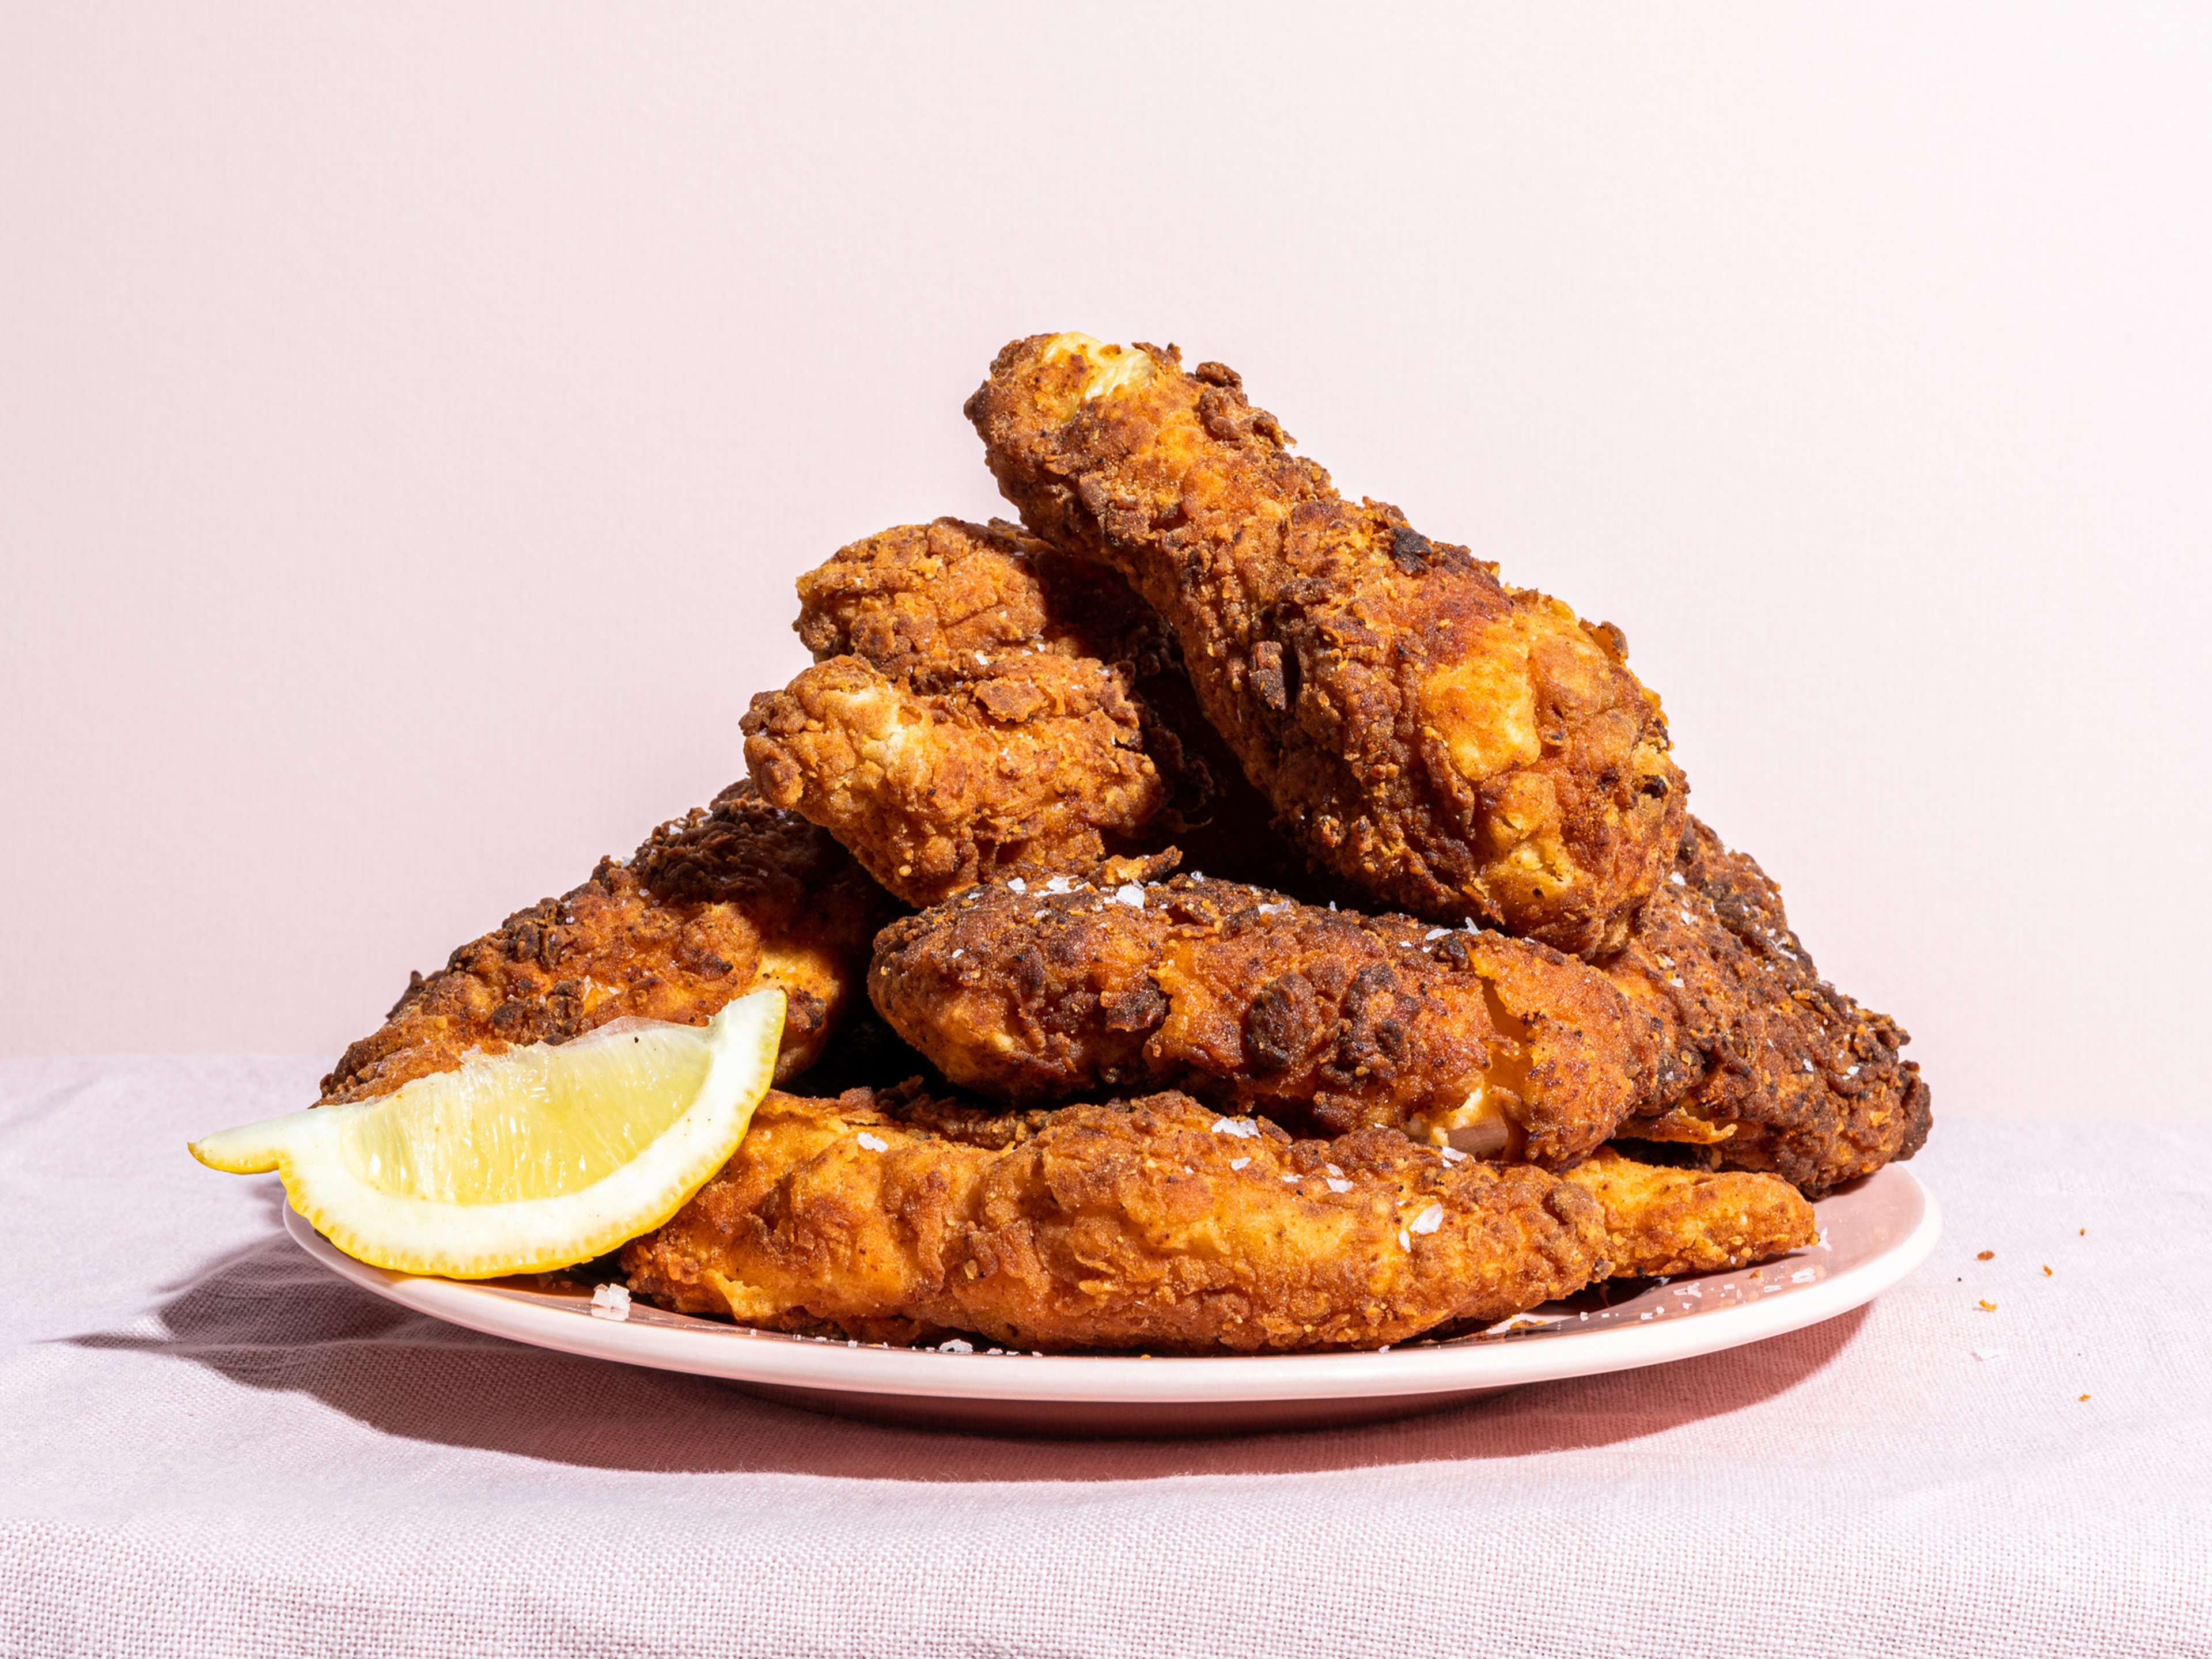 Deep-Frying vs. Air-Frying: Which Makes the *Best* Fried Chicken?